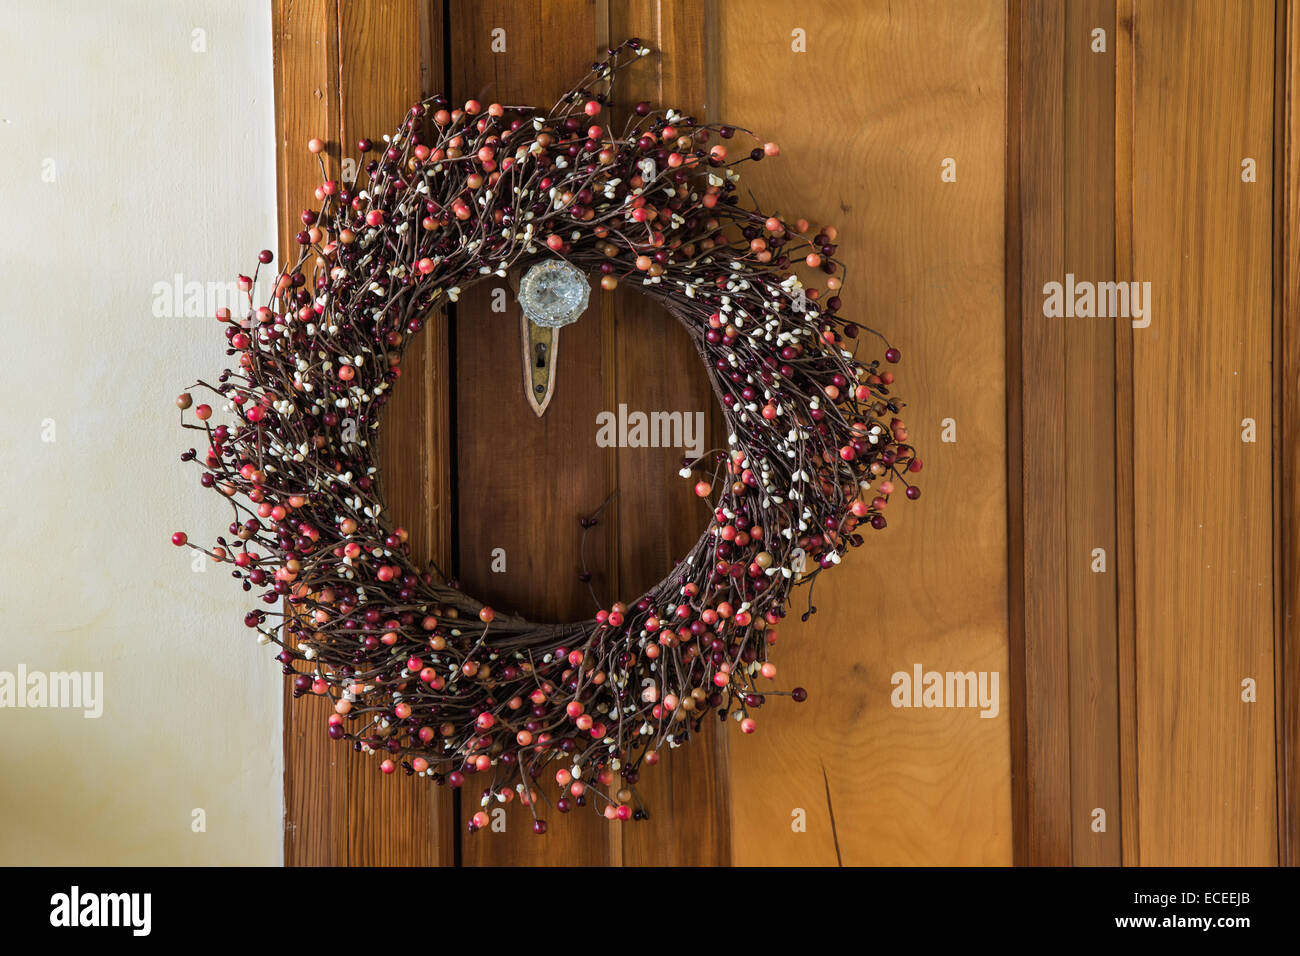 Rustic berry Christmas wreath hanging on a vintage door. Stock Photo